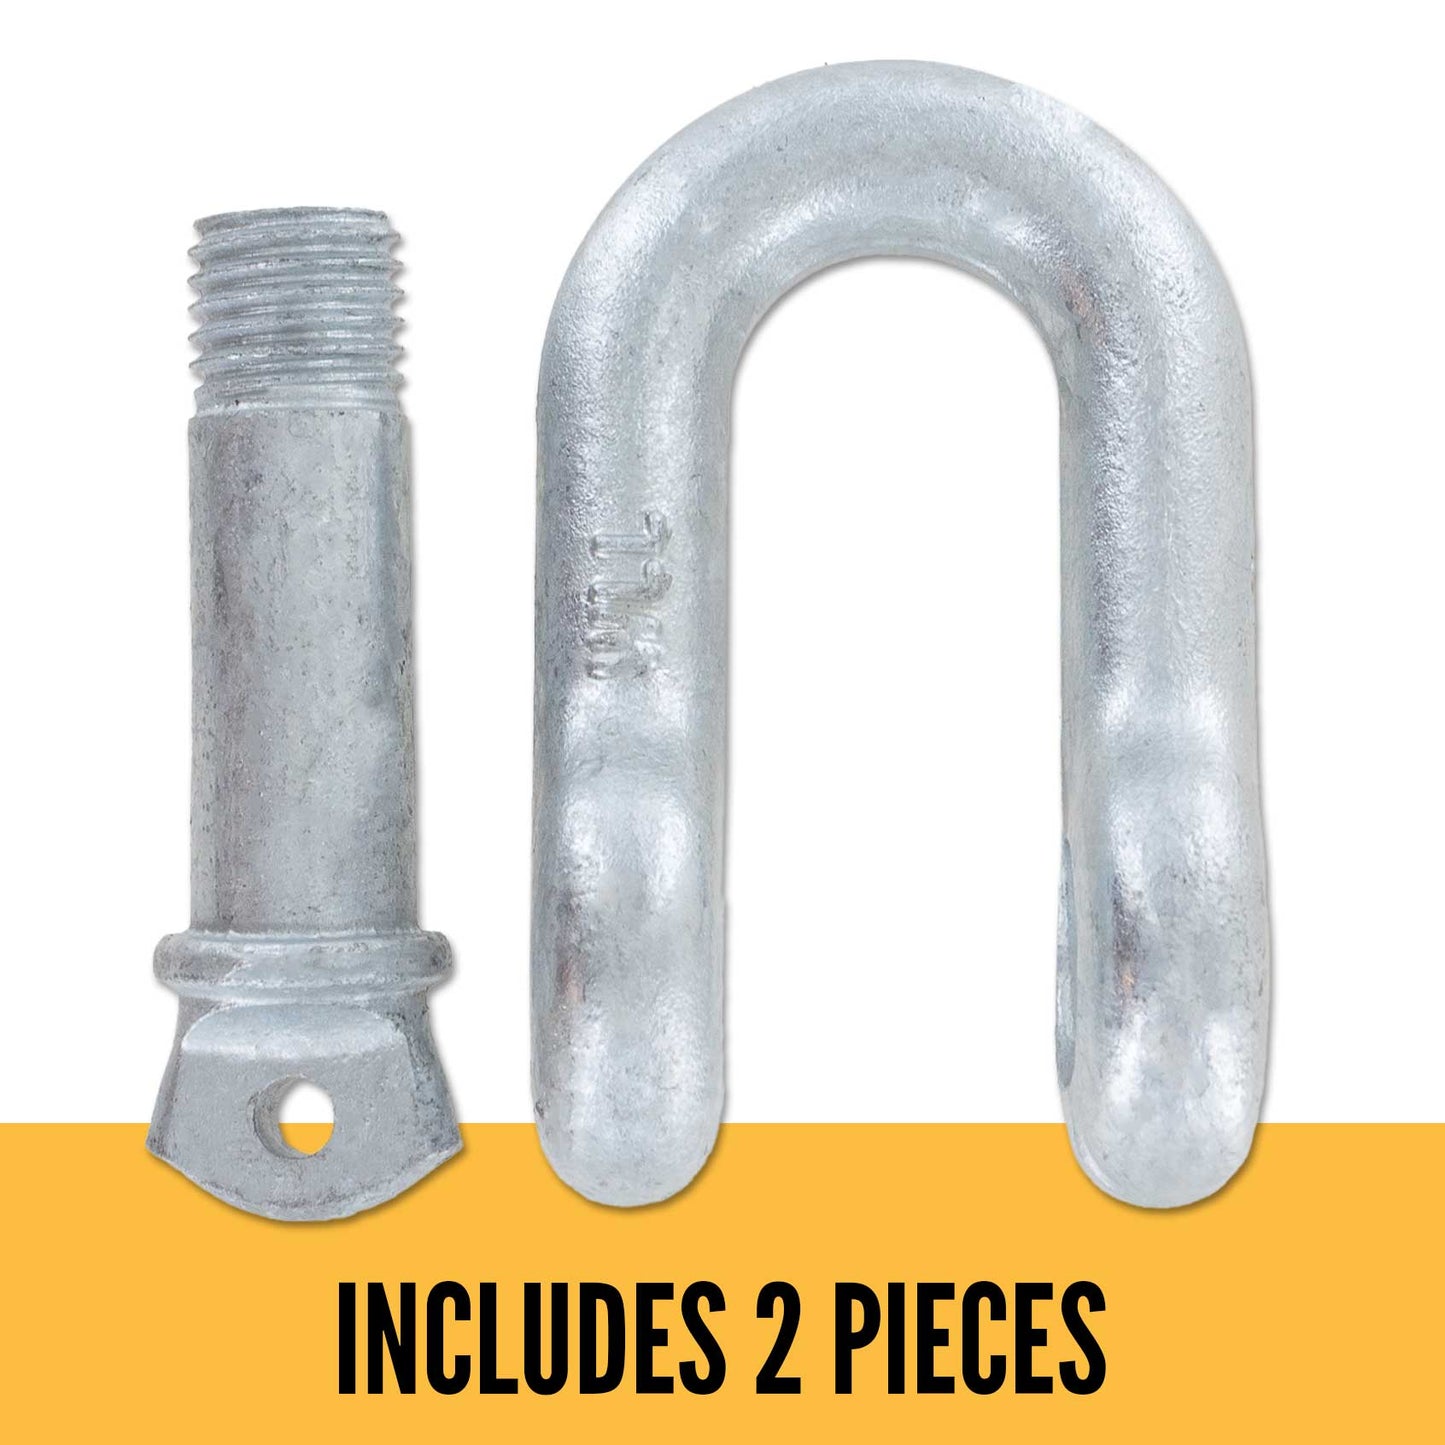 1/4" Galvanized Screw Pin Chain Shackle - 0.5 Ton parts of a shackle